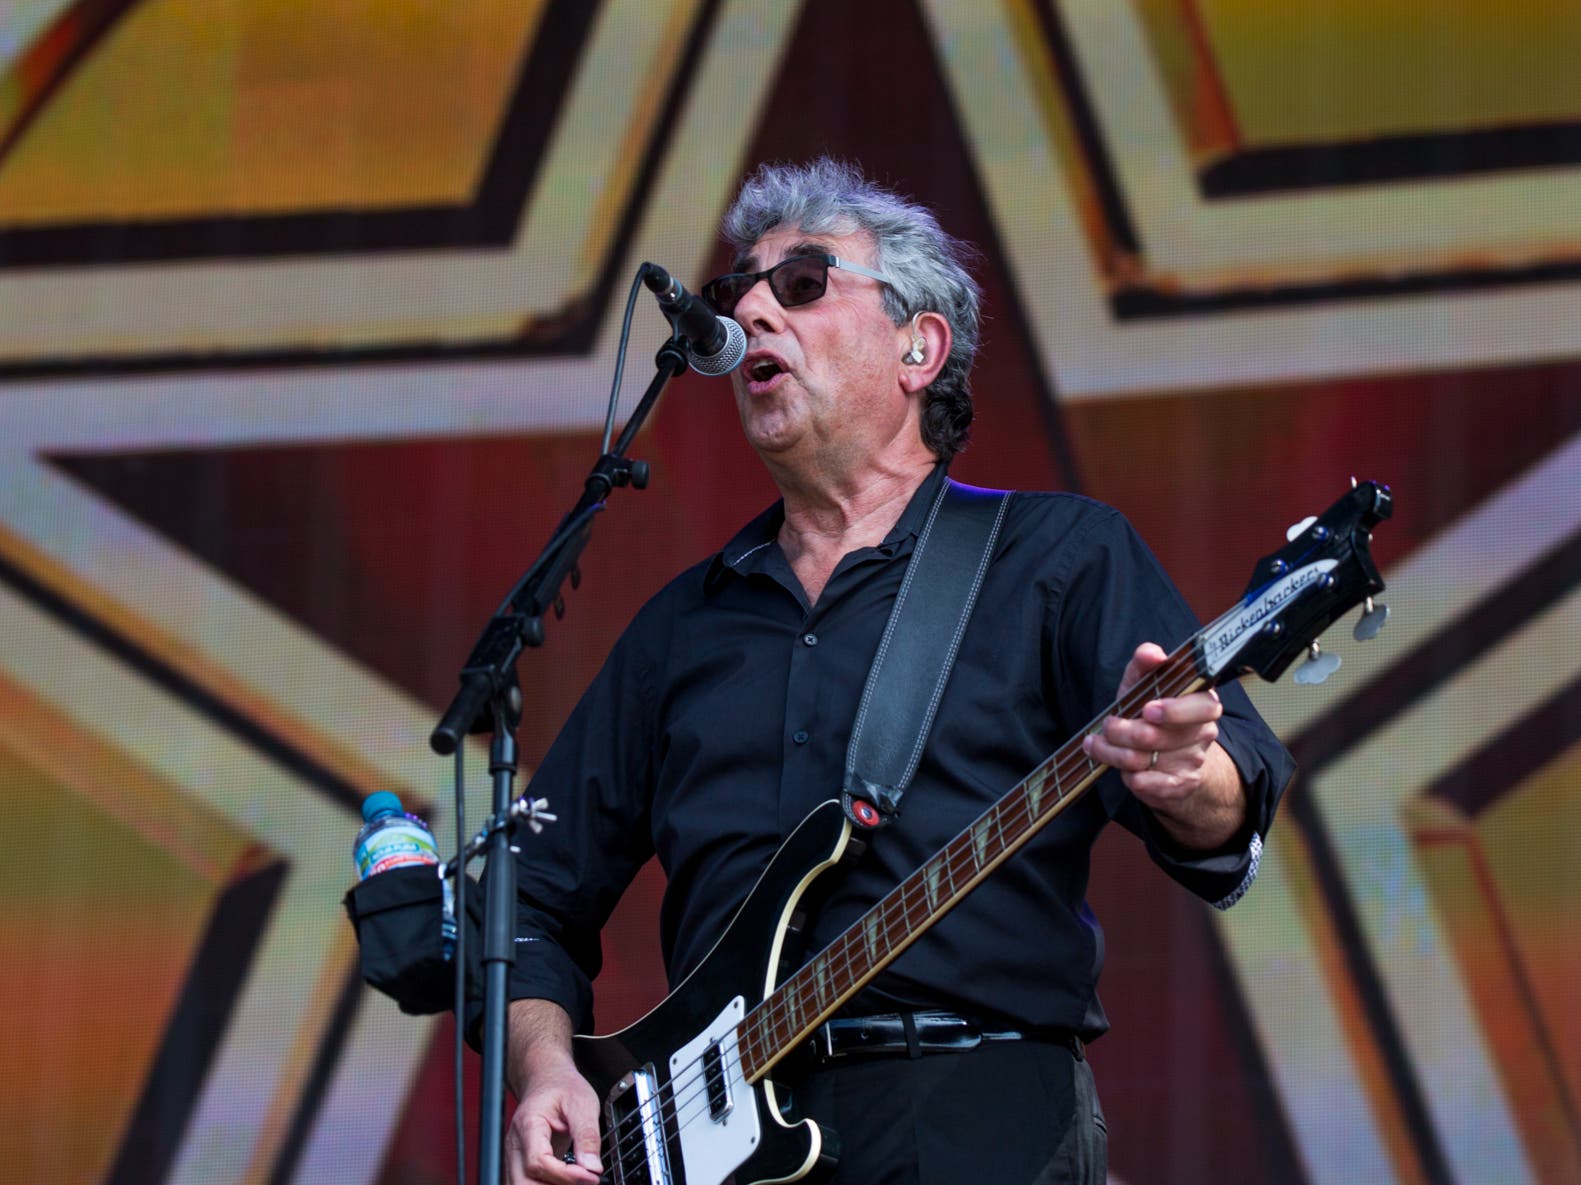 10cc star addresses ‘Dreadlock Holiday’ cultural appropriation claims